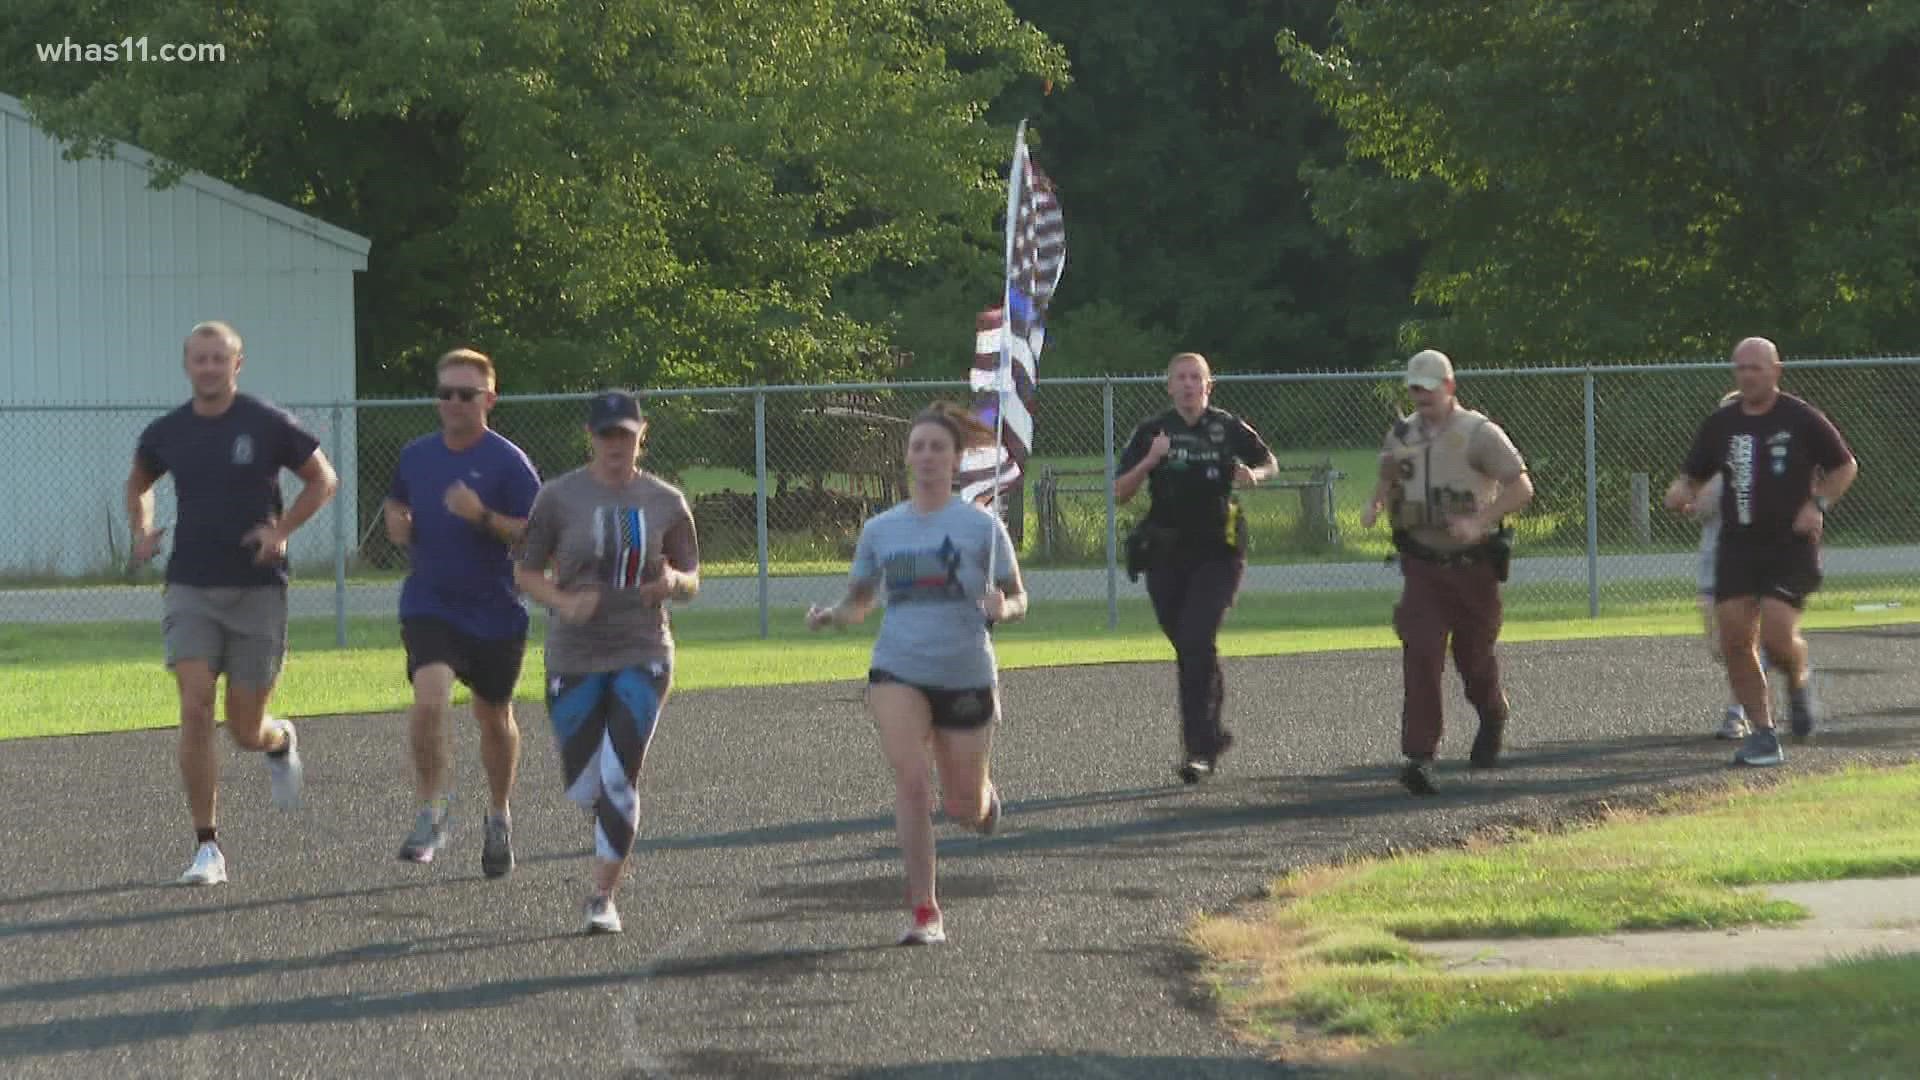 The run for Deputy Brandon Shirley was held at his alma mater Fairdale High School. Photojournalist Alyssa Newton shares how the hero was honored.